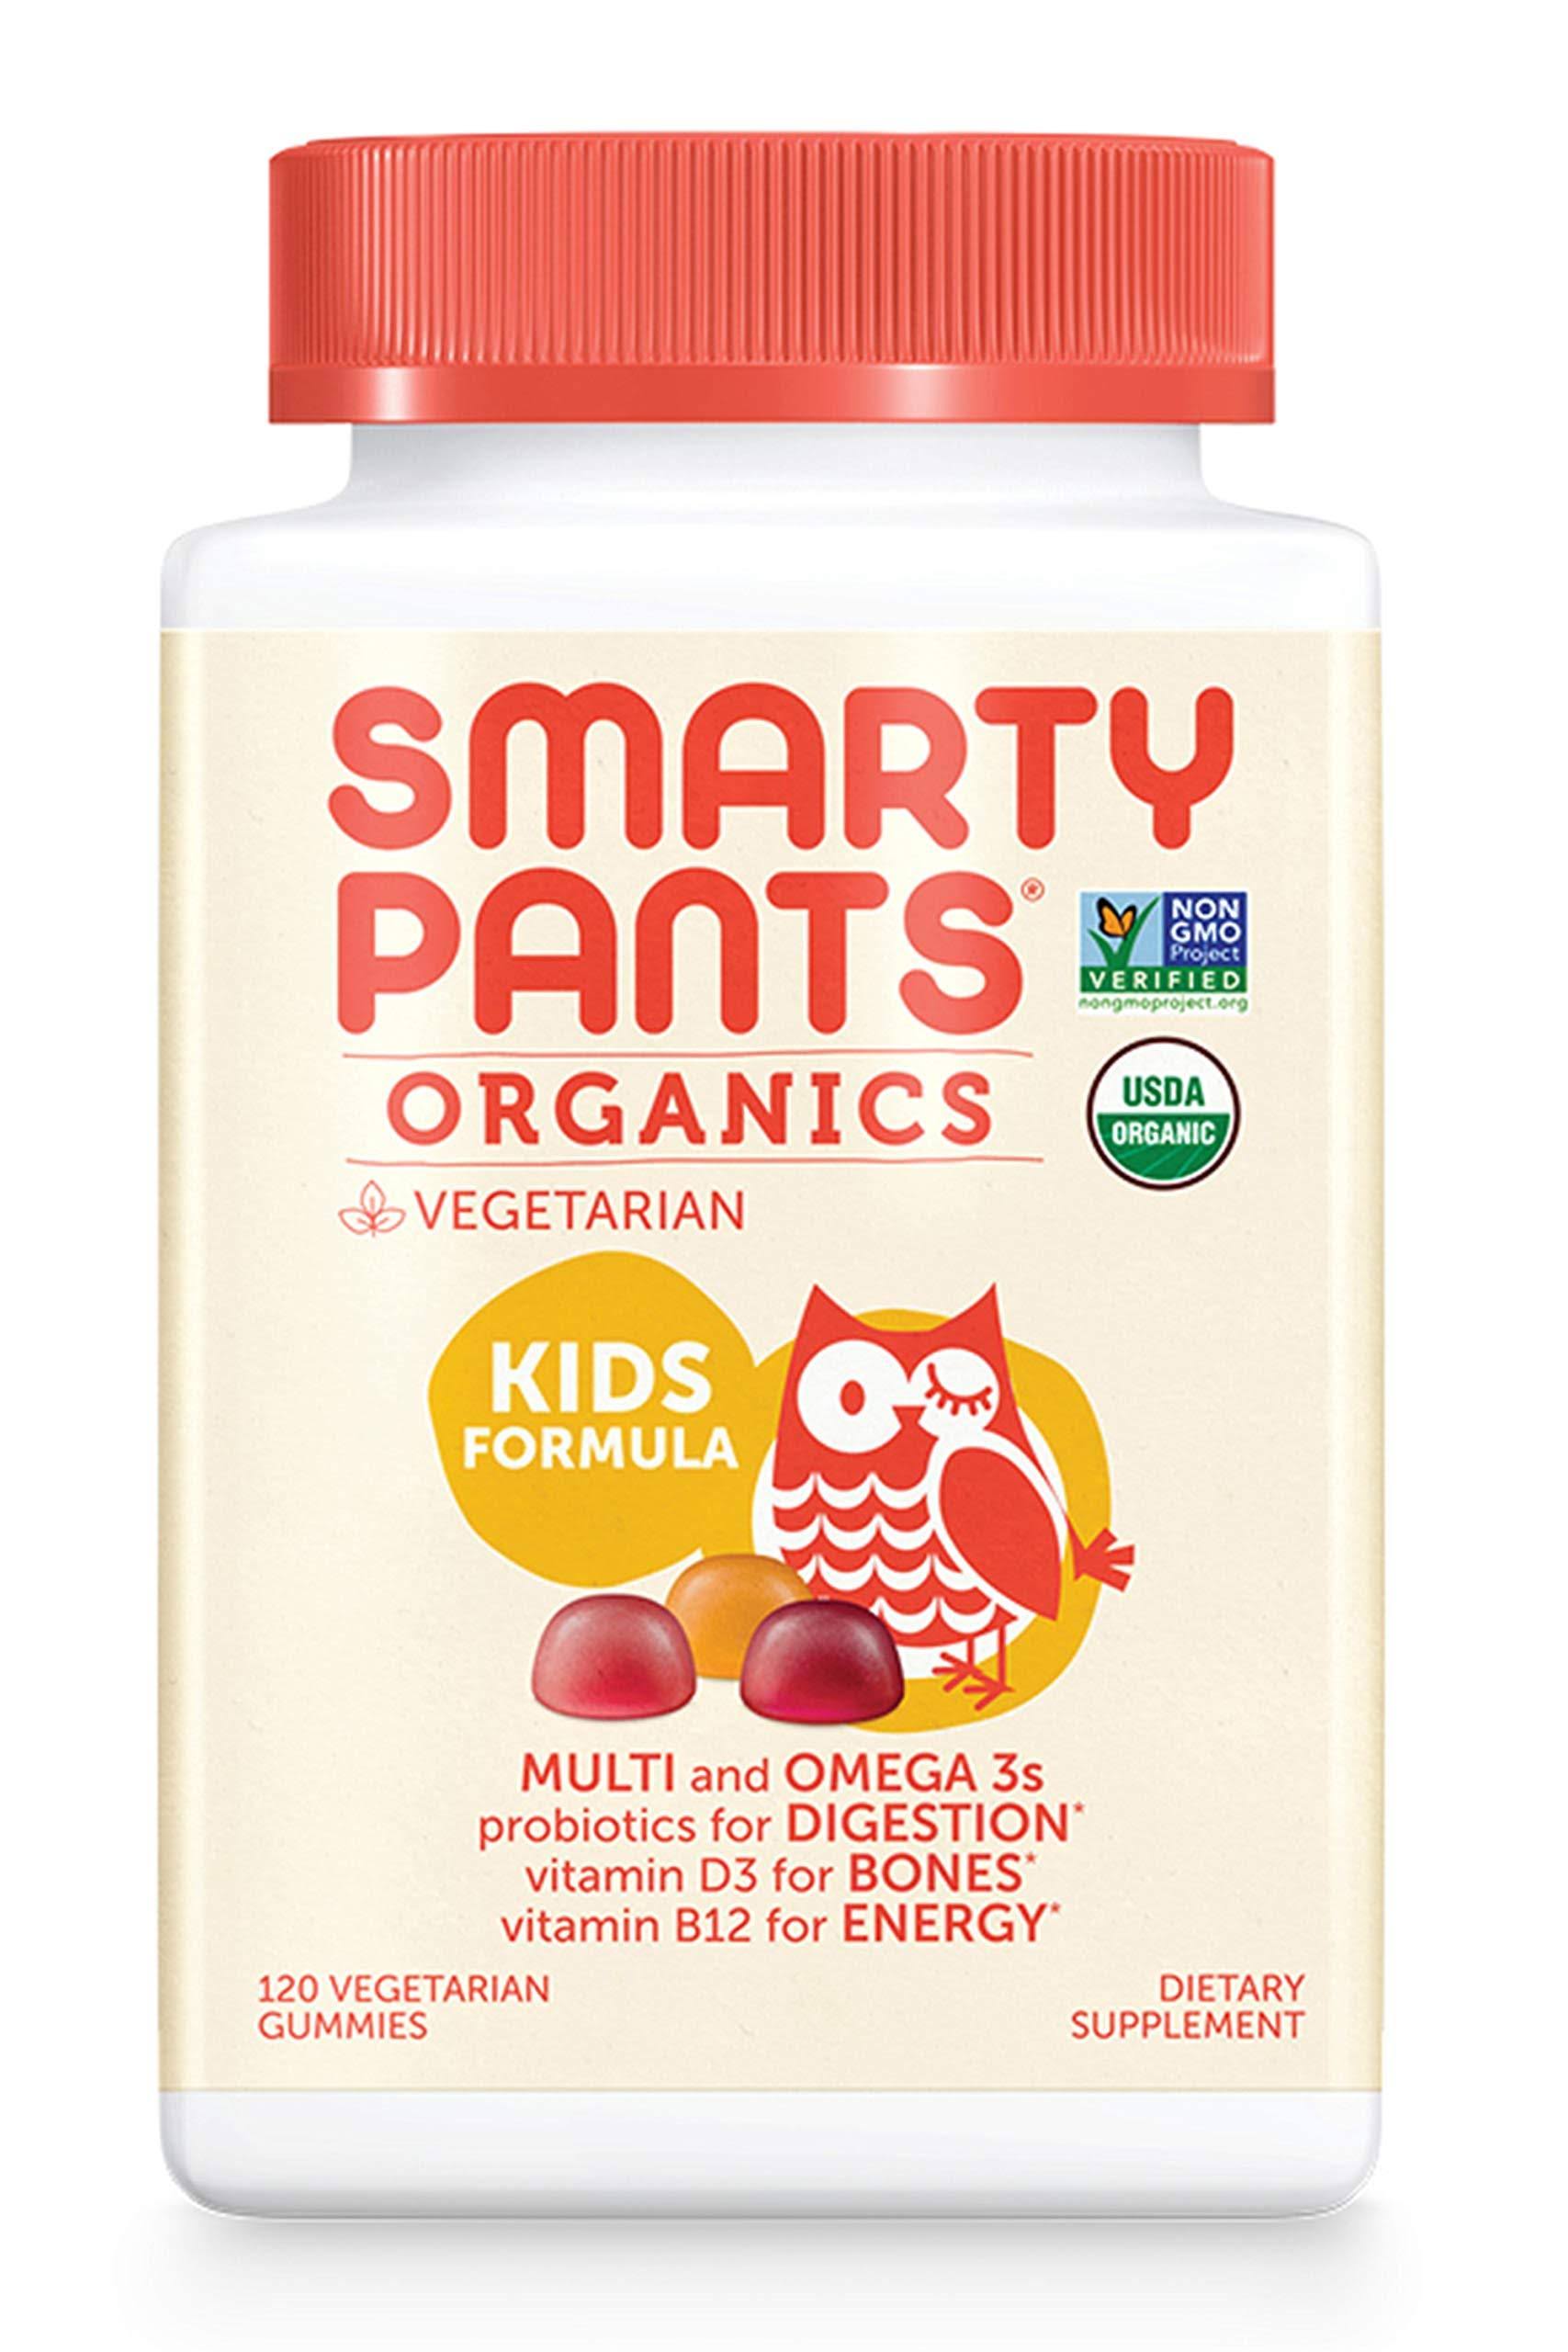 SmartyPants Vitamins Organic Kids Complete Dietary Supplement - 120ct